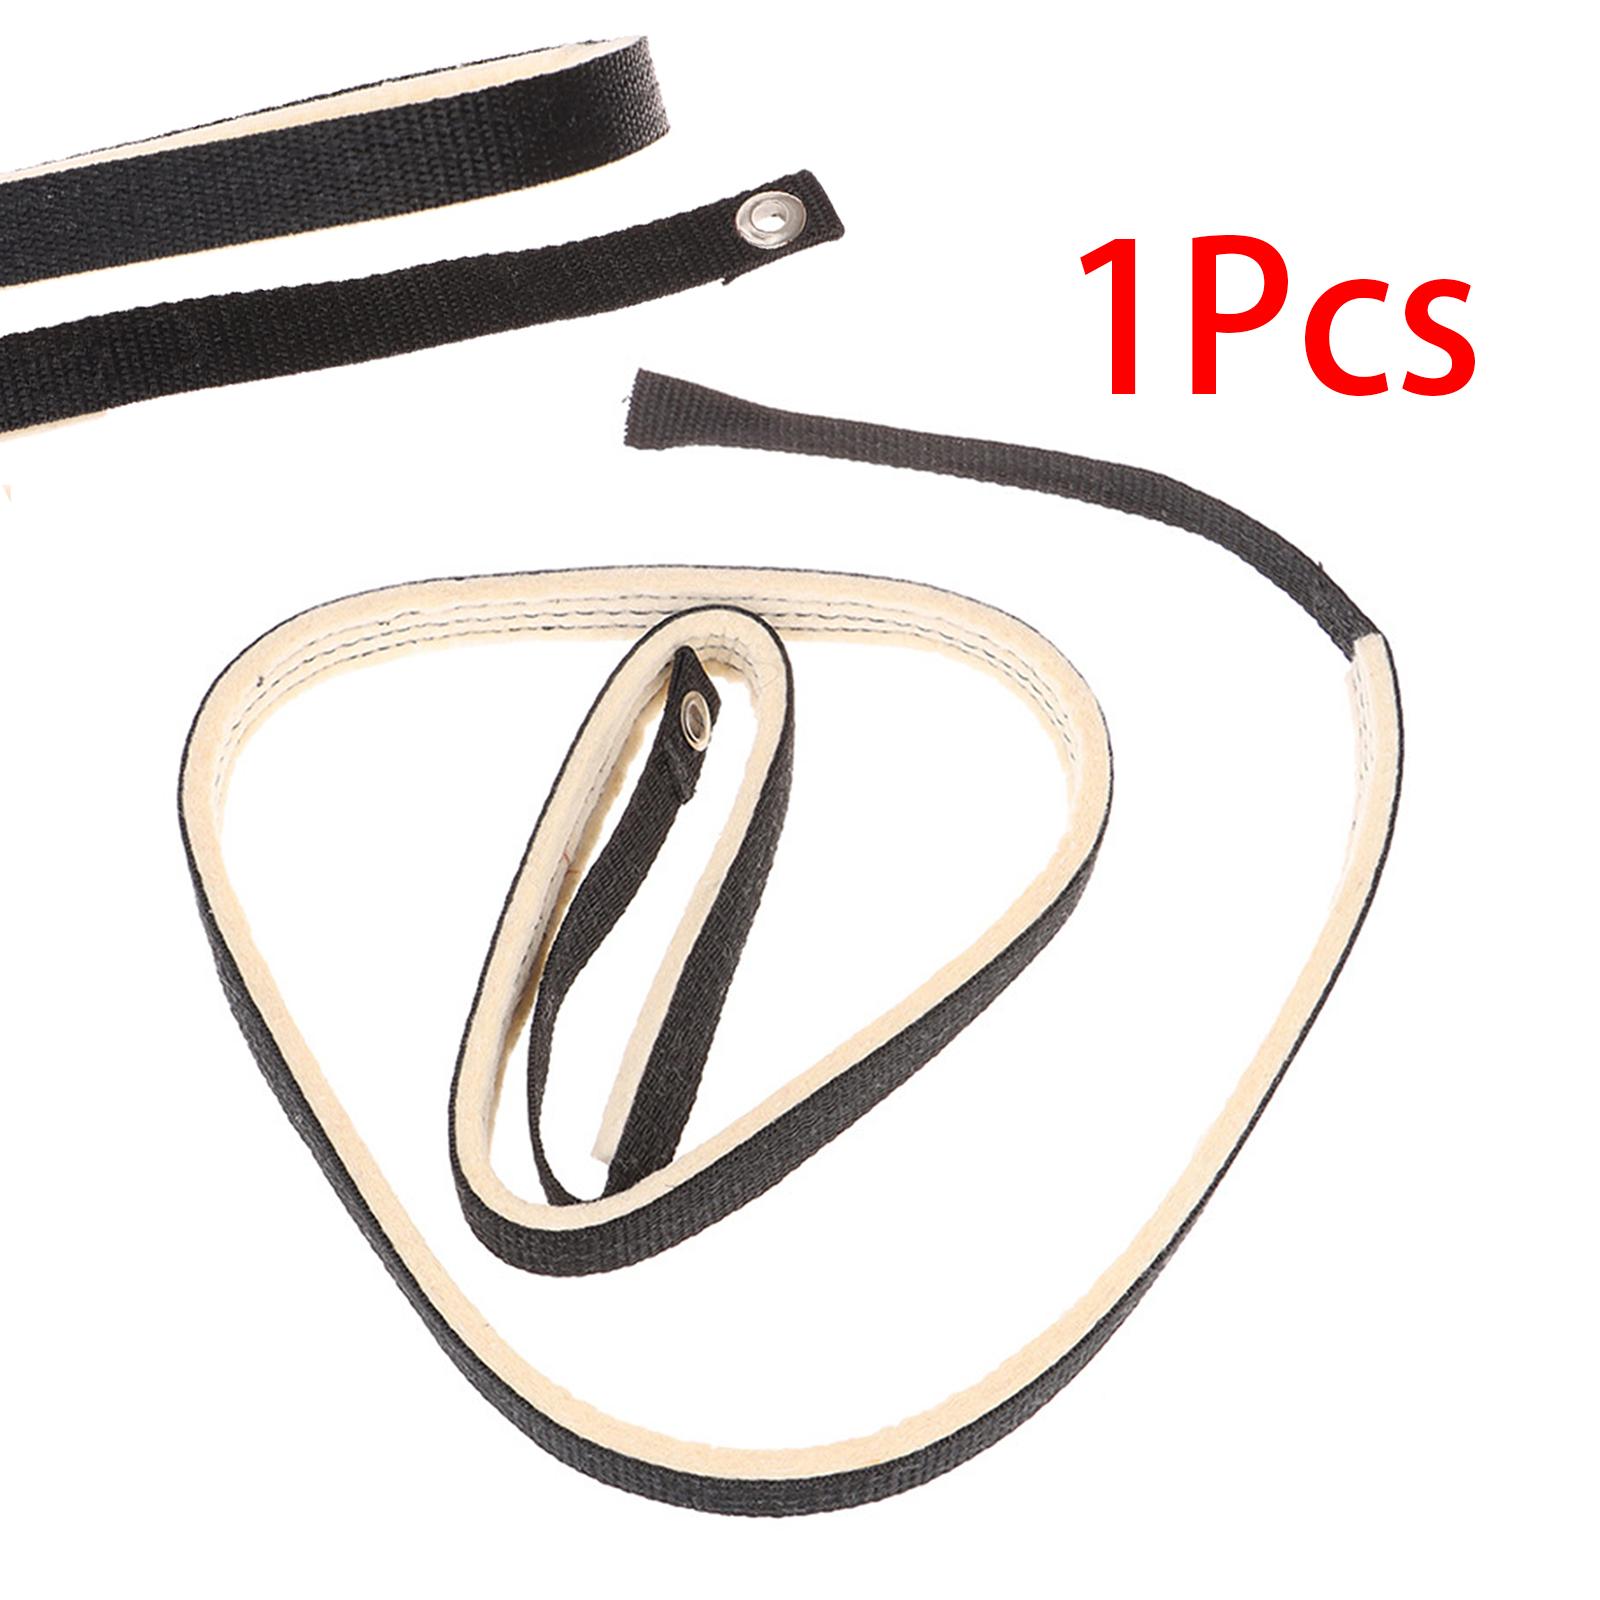 Exercise Bike Elliptical Machine Power Belt Parts Replacement Strap for Indoor Gym